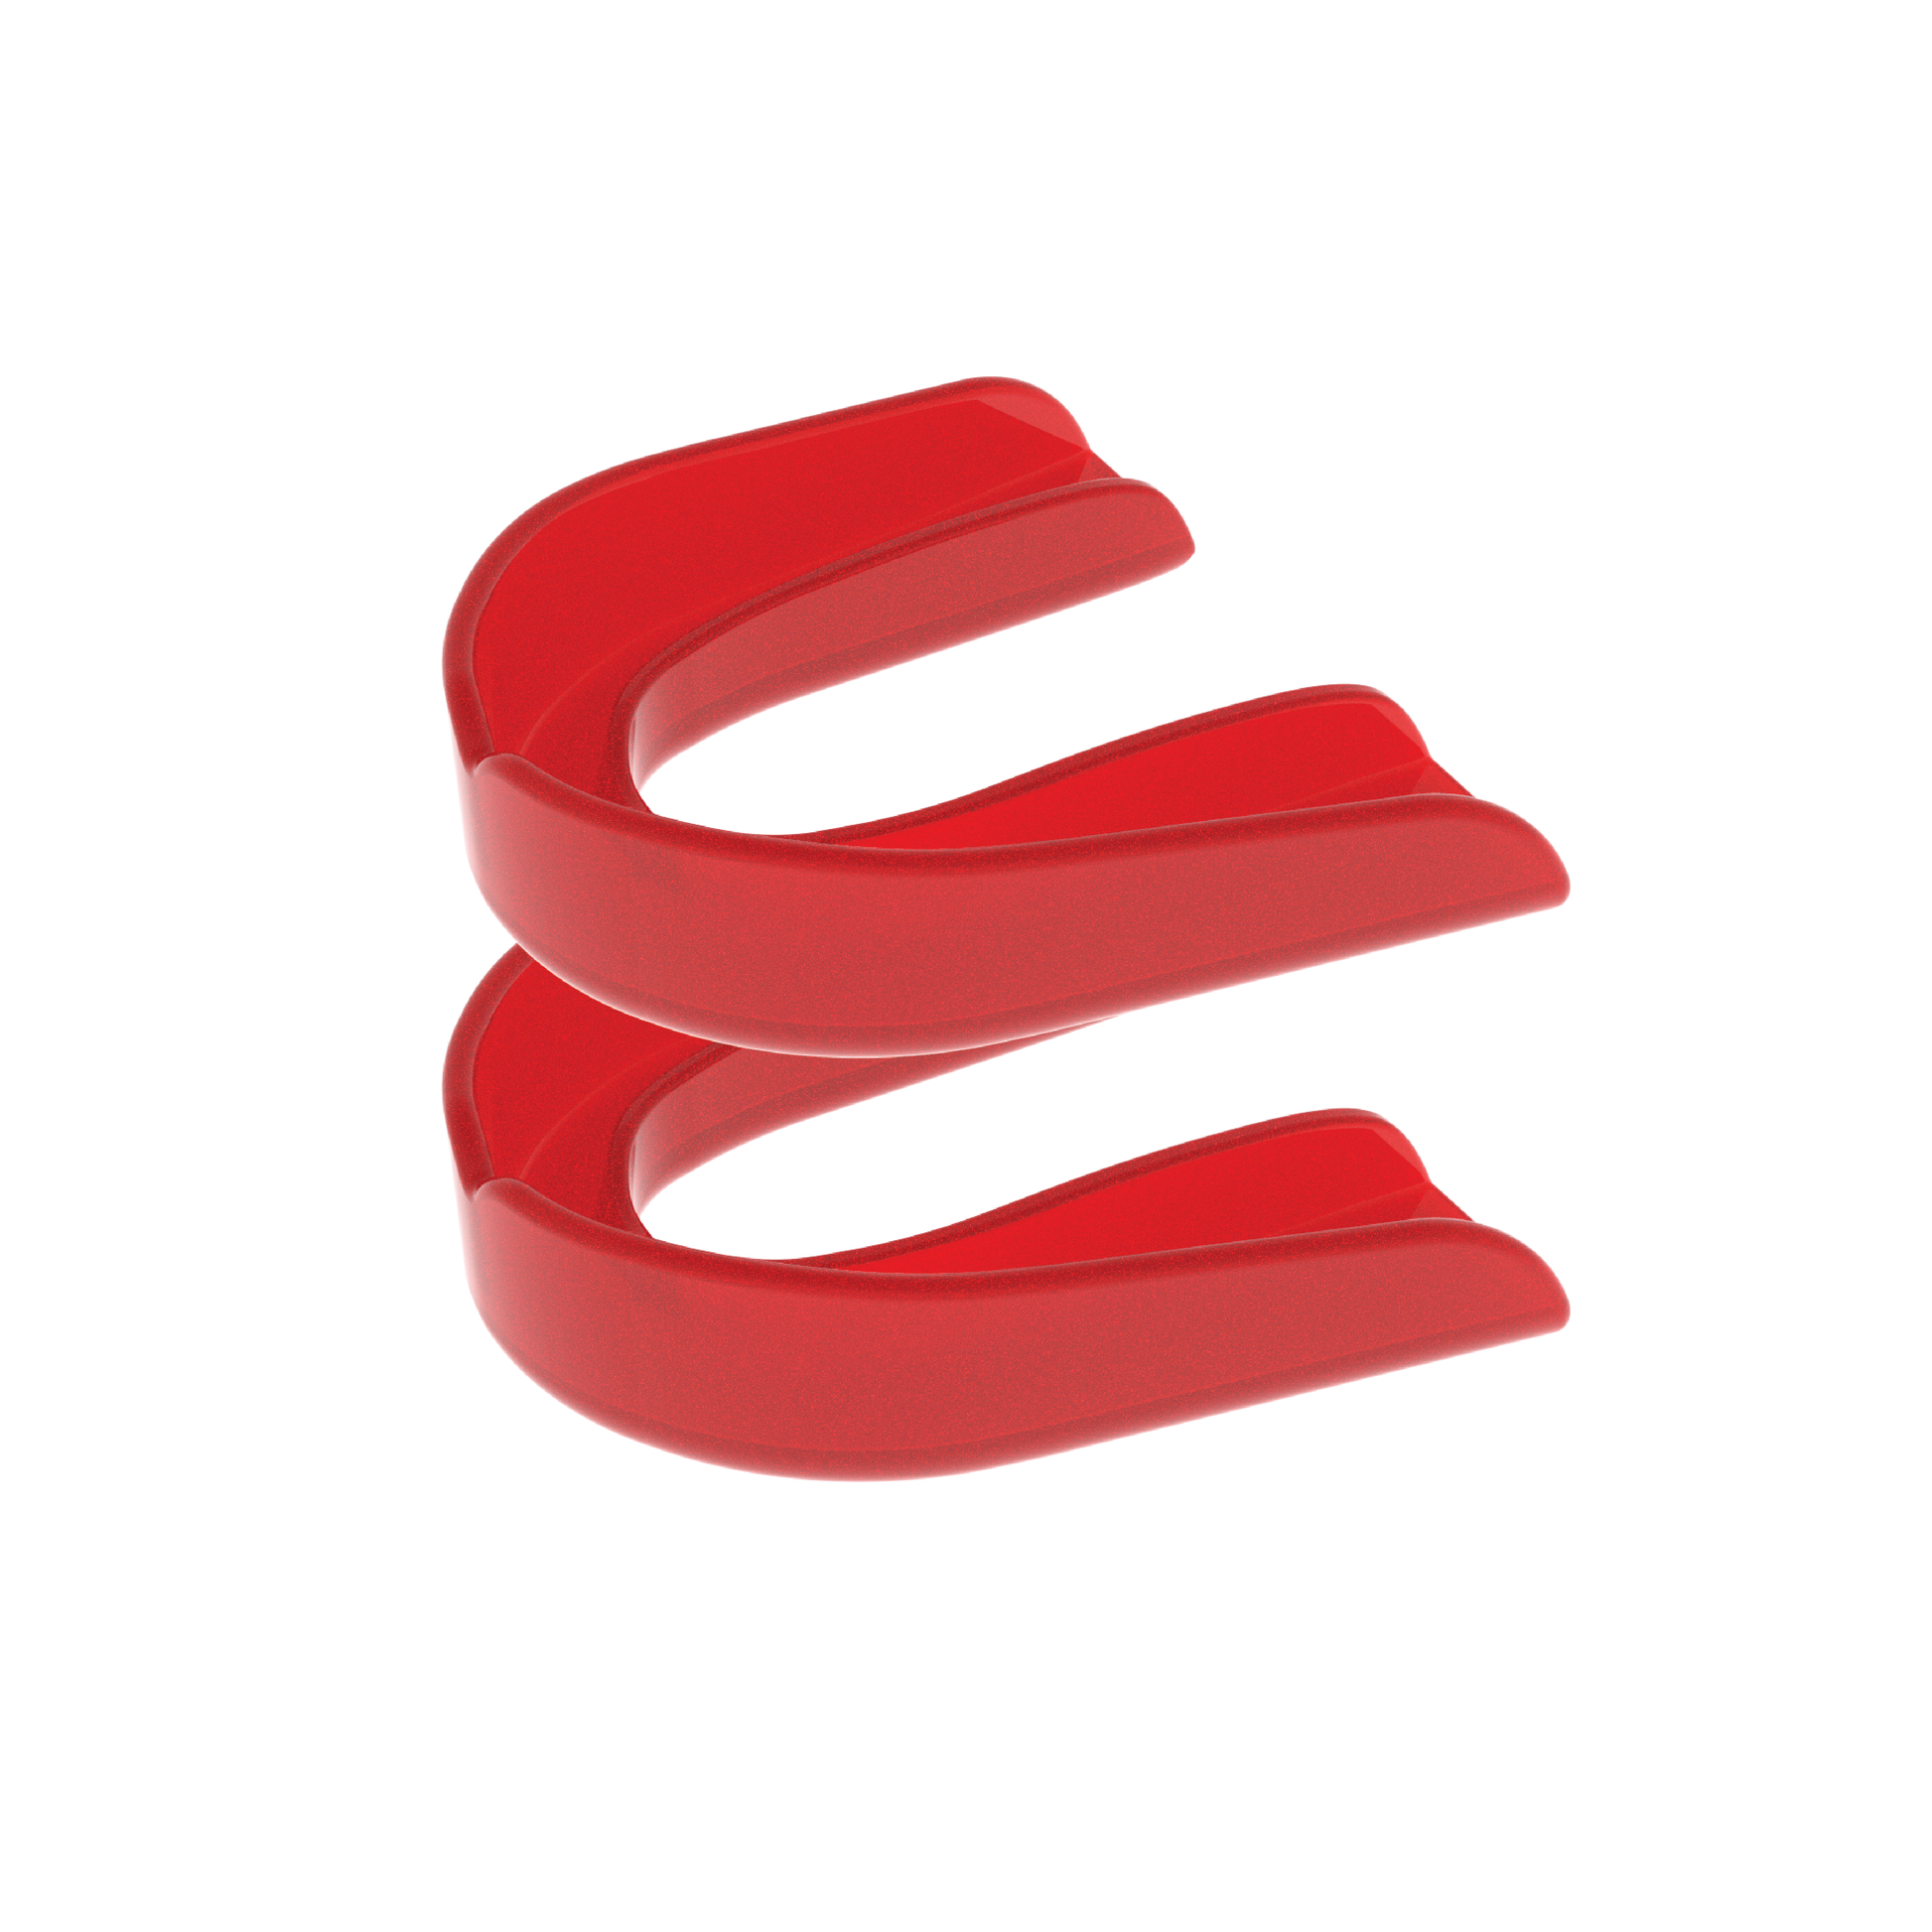 Two red strapless mouth guards 